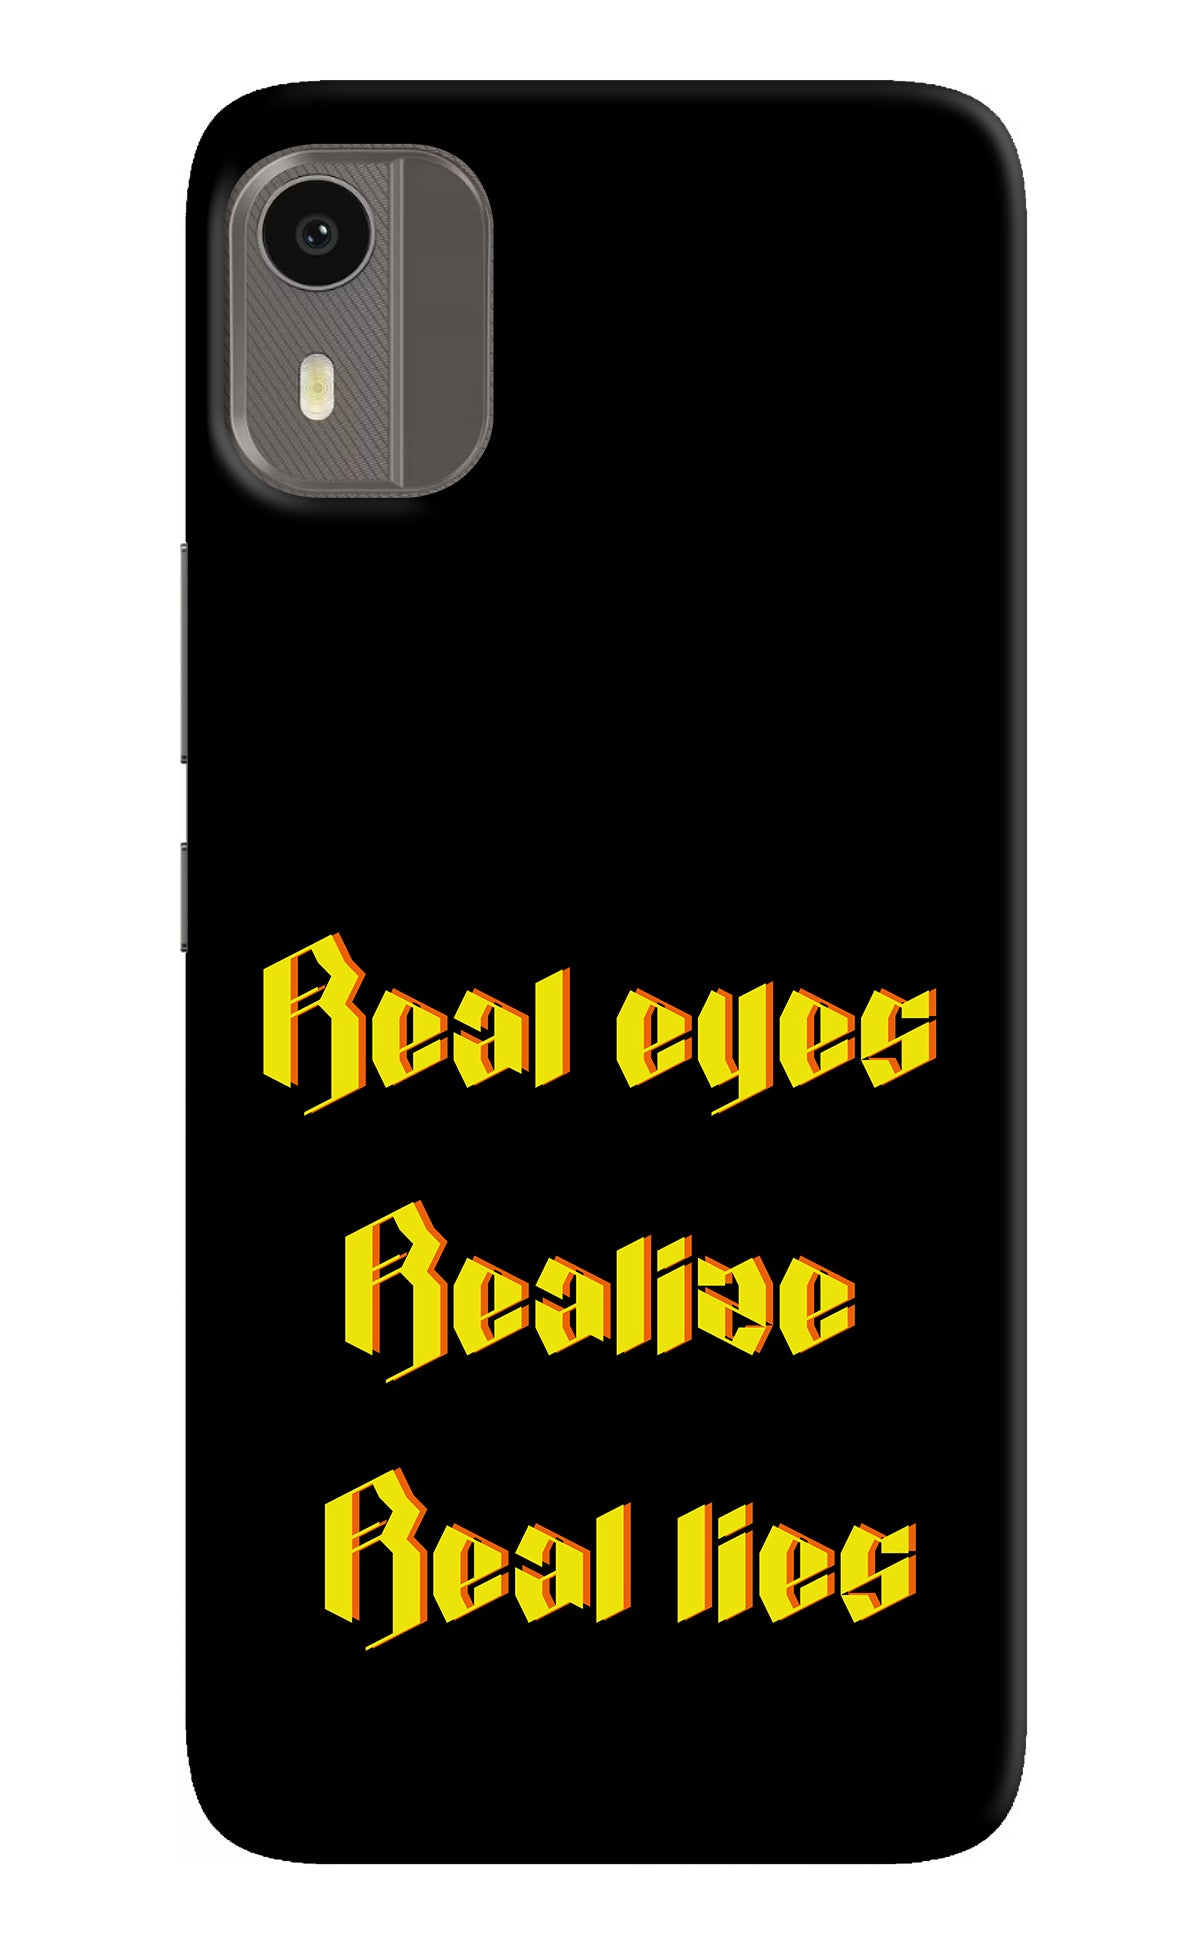 Real Eyes Realize Real Lies Nokia C12/C12 Pro Back Cover